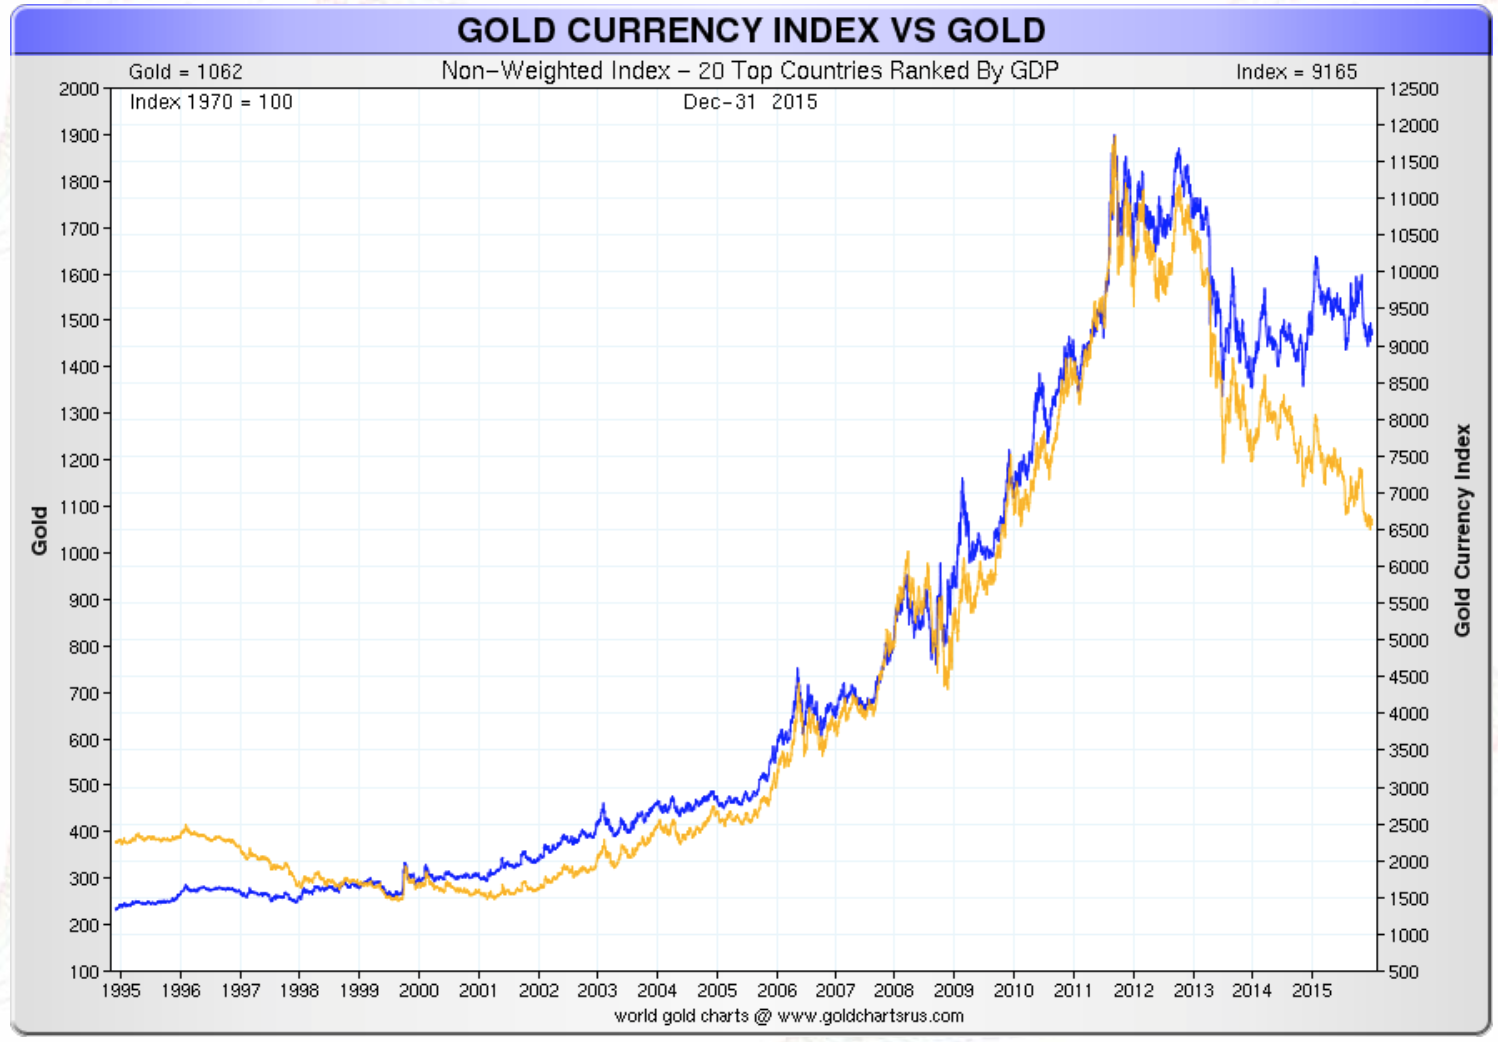 Gold currency index vs Gold